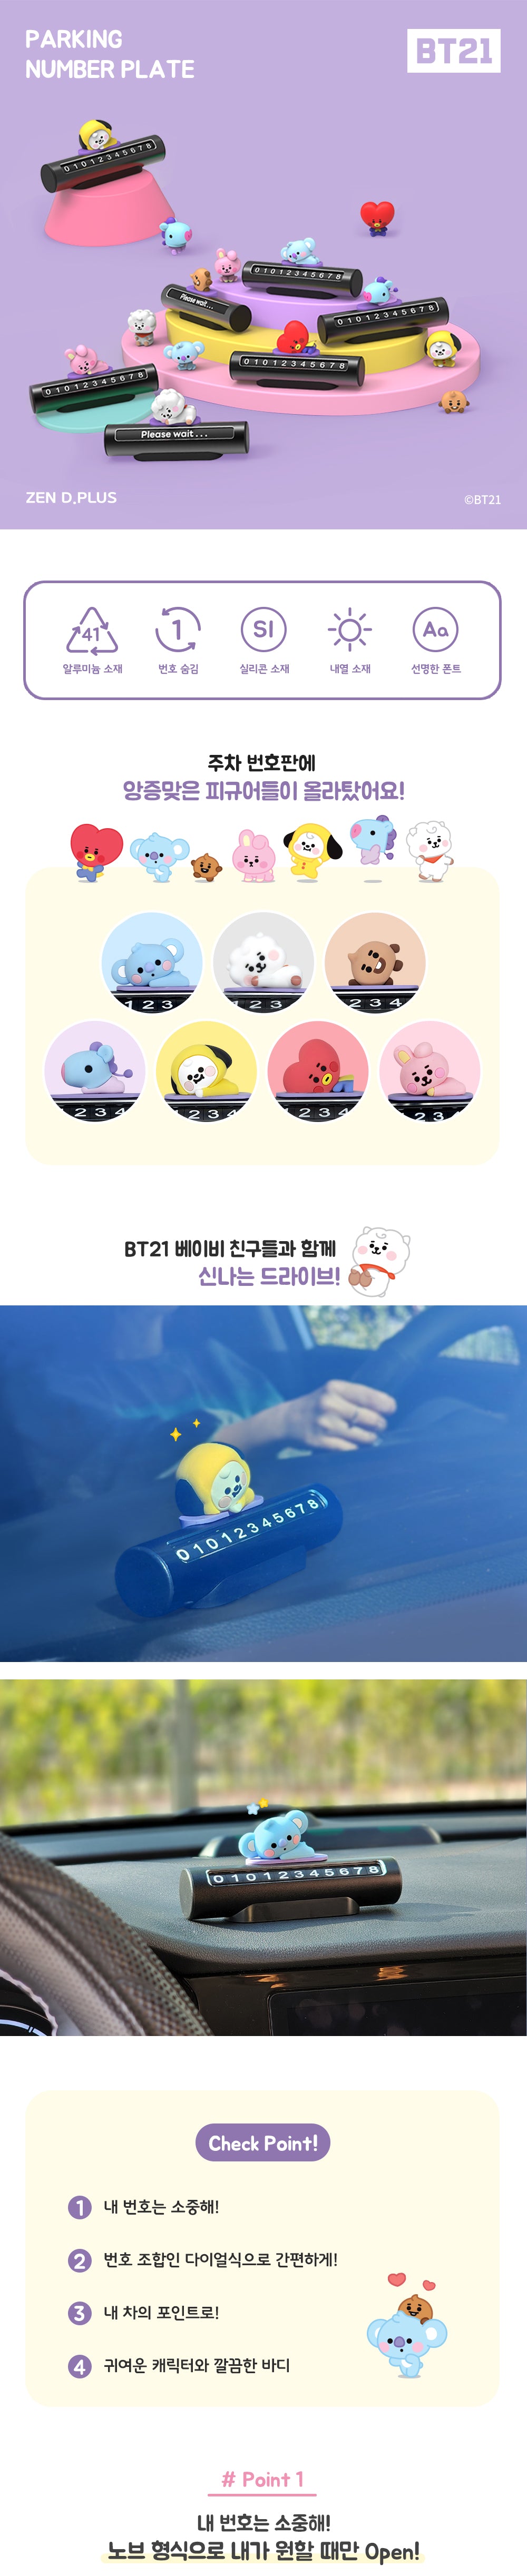 BT21 BABY Parking Number Plate